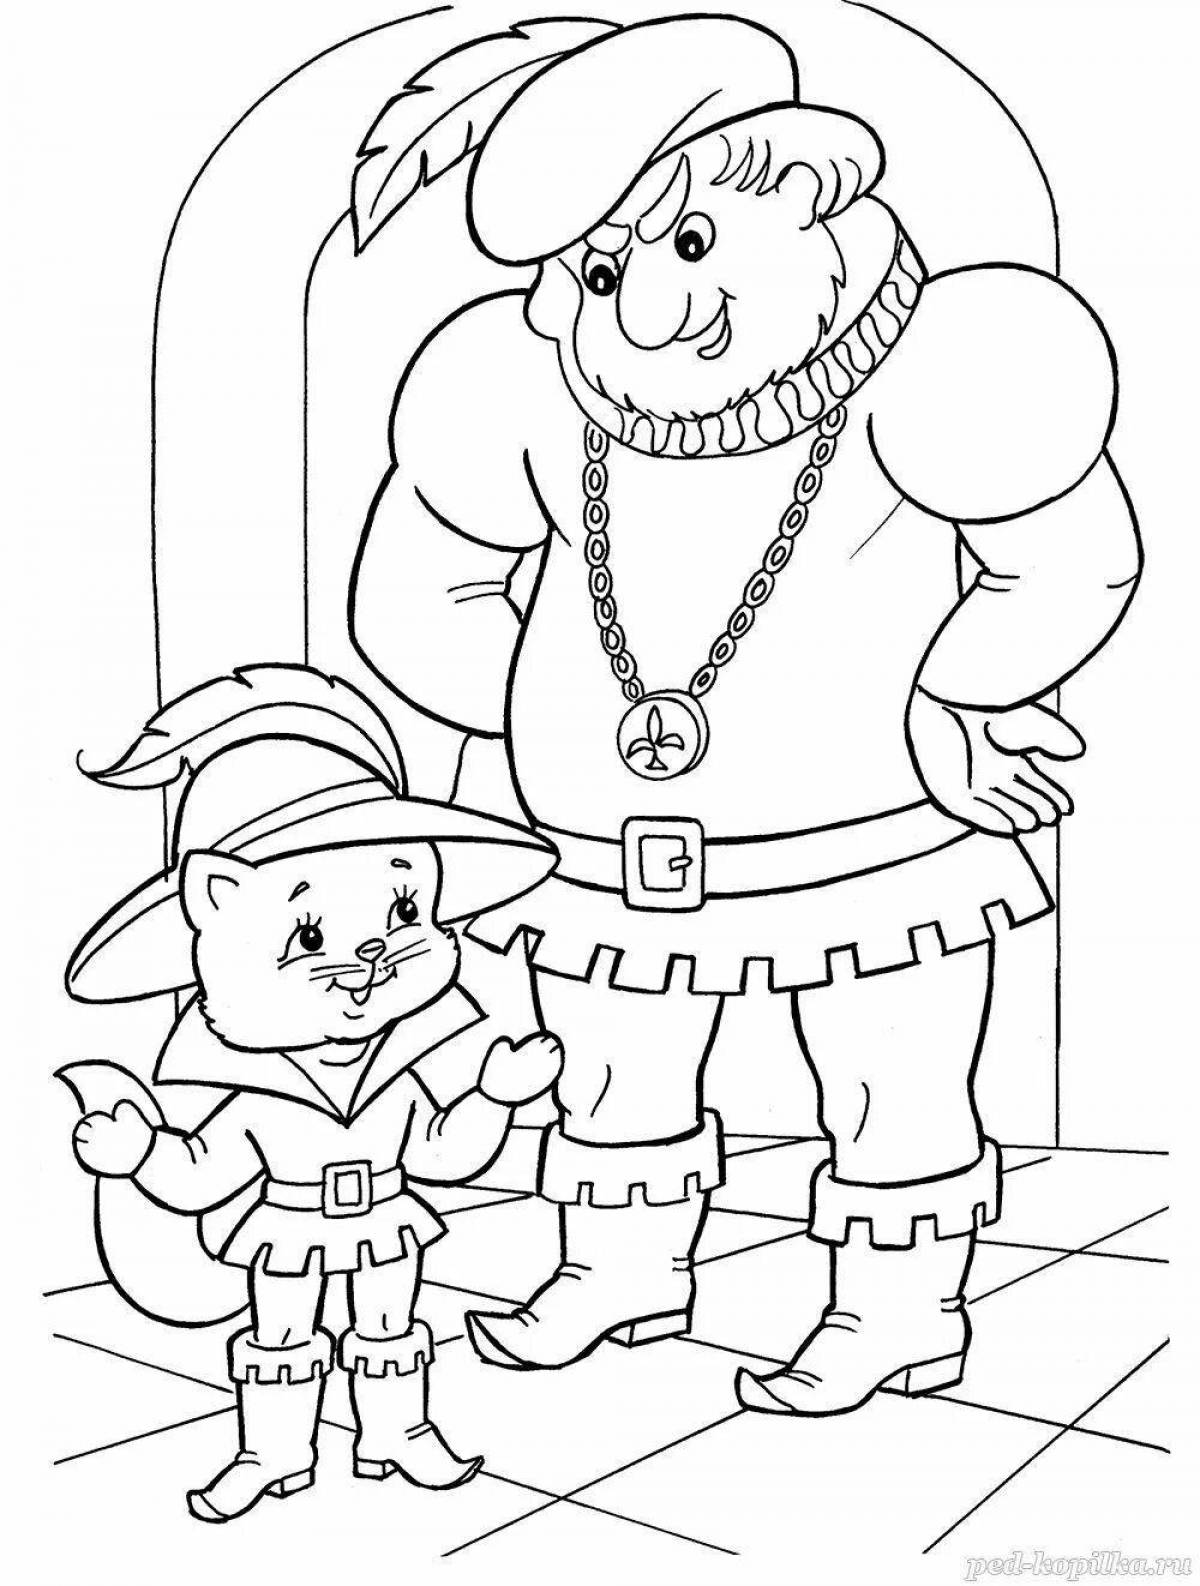 Fabulous cannibal coloring page